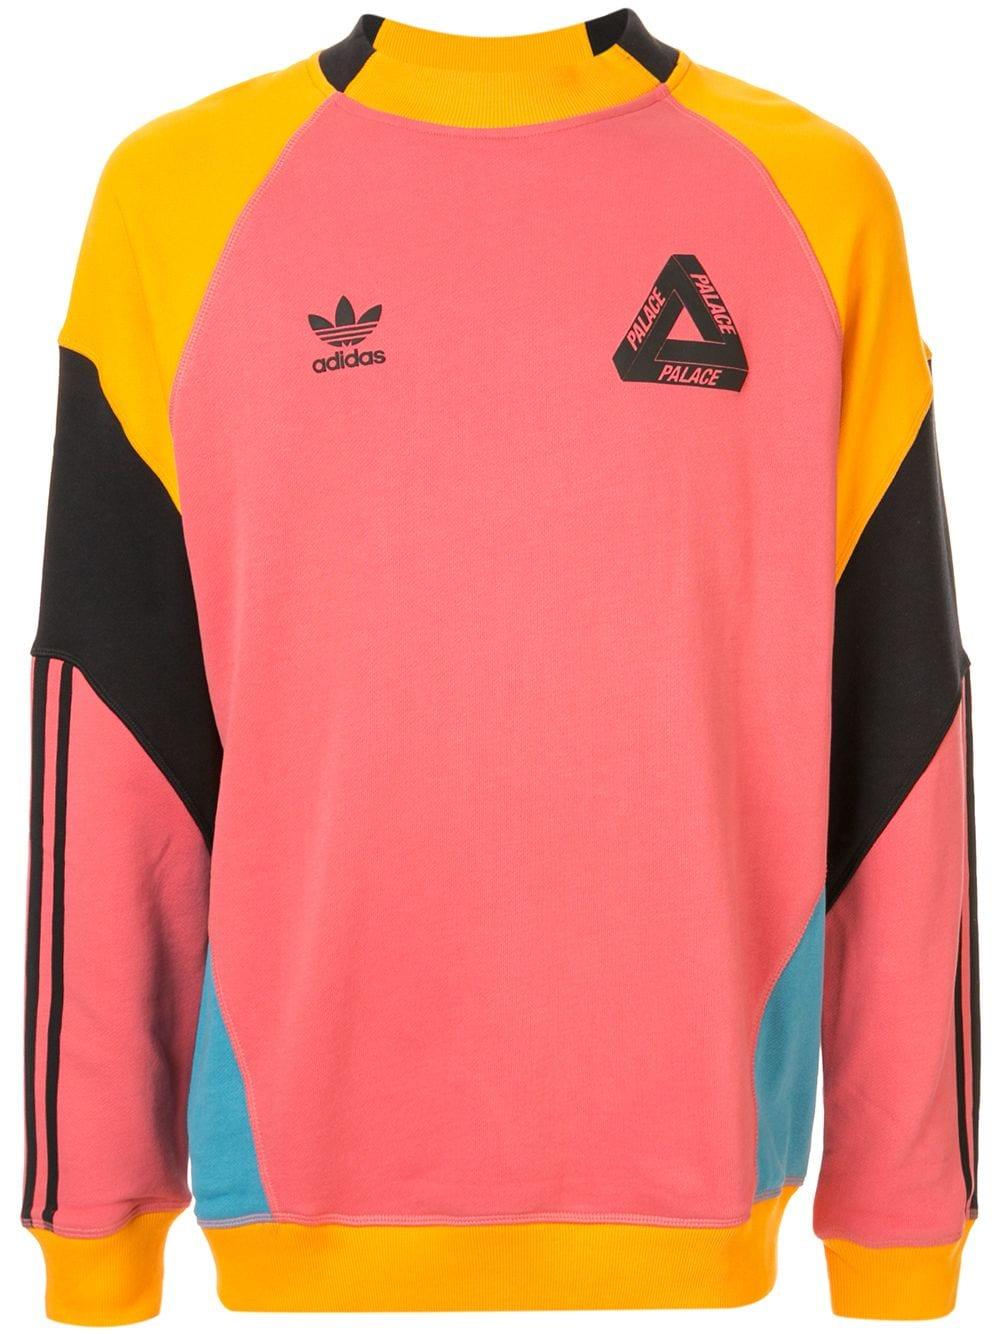 Palace Cotton X Adidas Crew Neck Sweatshirt in Pink for Men - Lyst